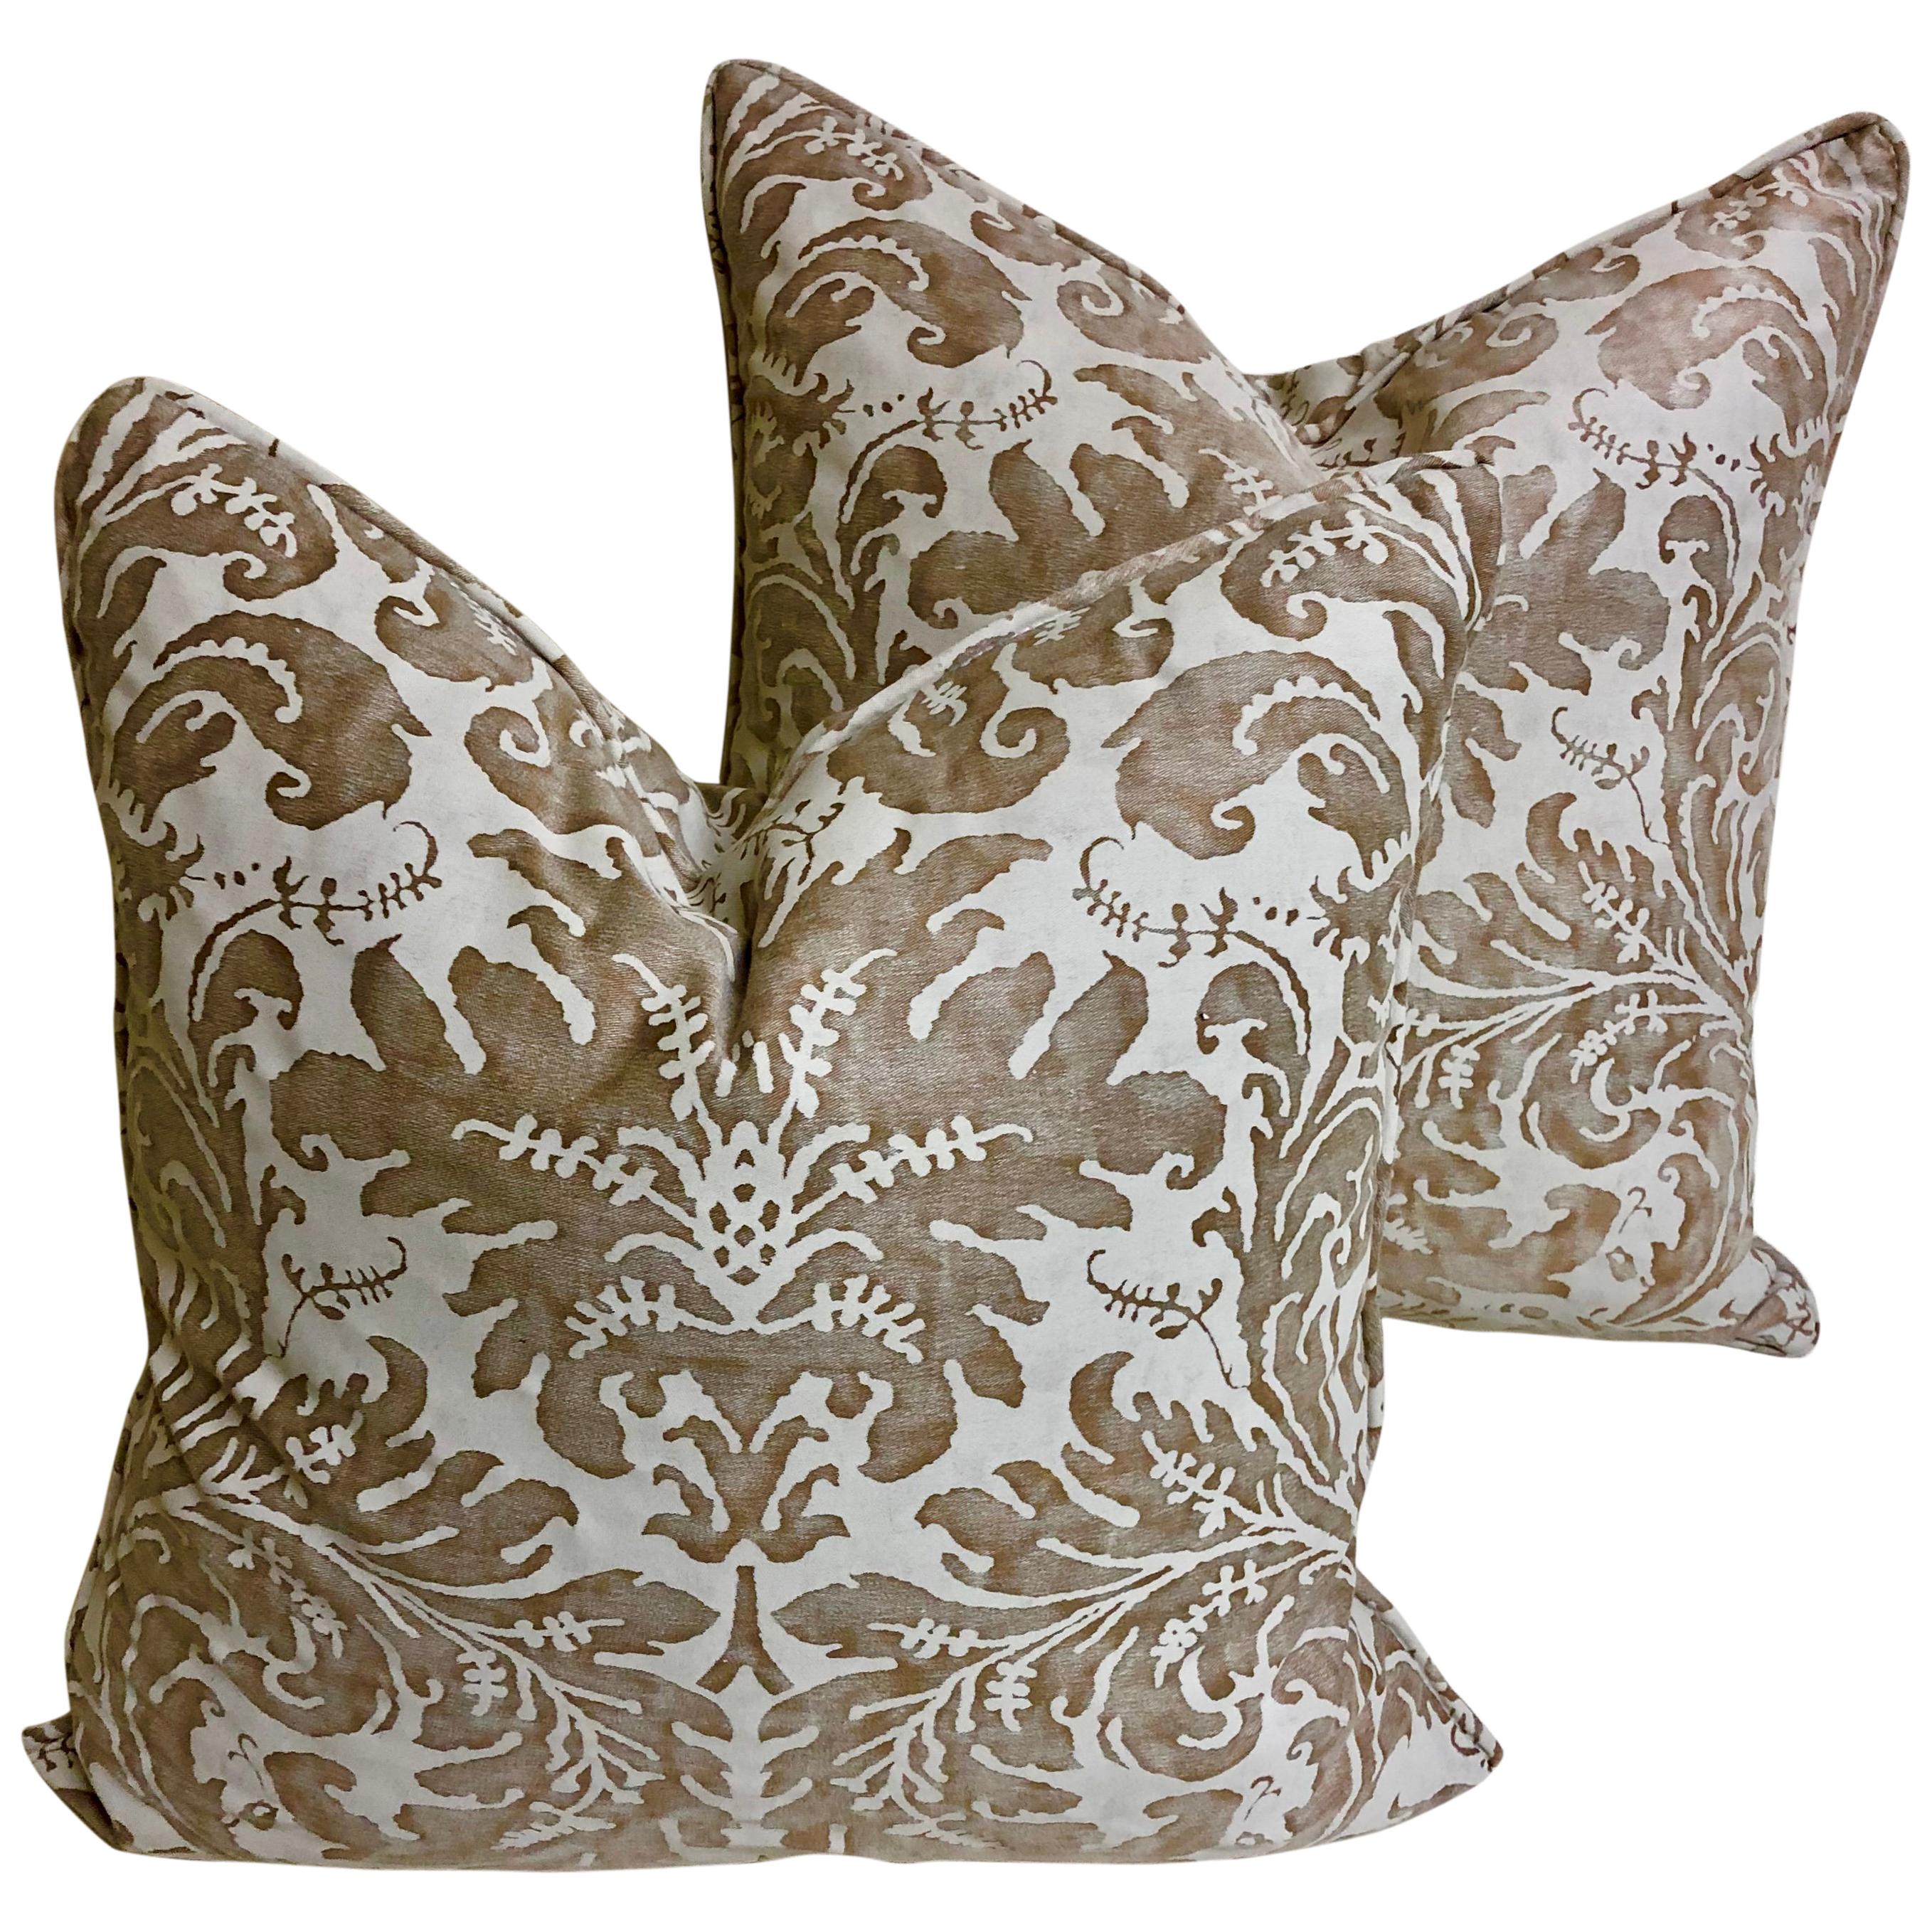 Pair of Fortuny Down-Filled Cushions in the "LUCREZIA" pattern